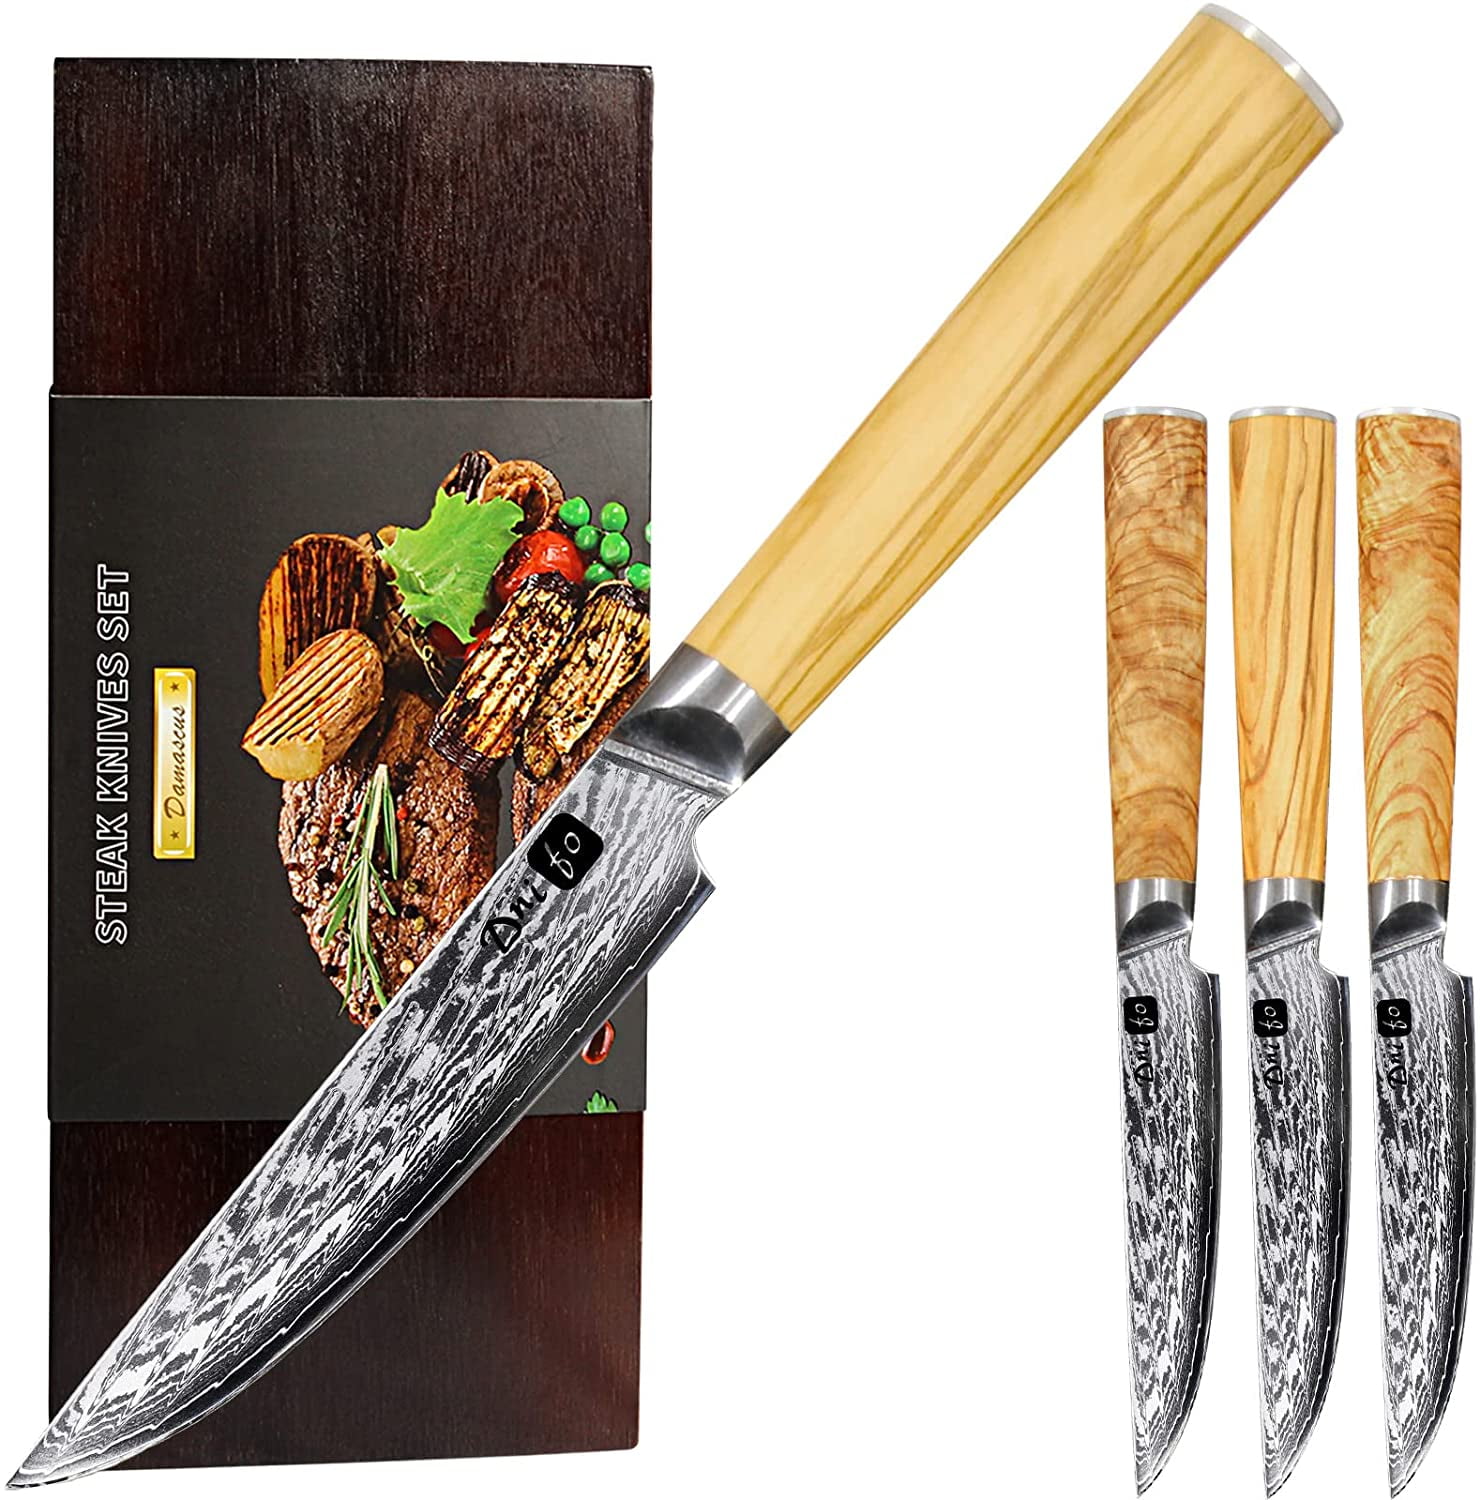 Steak Knives, 6-pcs, Super-Sharp 5” Damascus Steak Knife, Highly Resistant  and Durable, Rust-Resistant Japanese VG10 Steel, Olive Wood Handle,  Non-Serrated Steaks Knives in Gift Box 